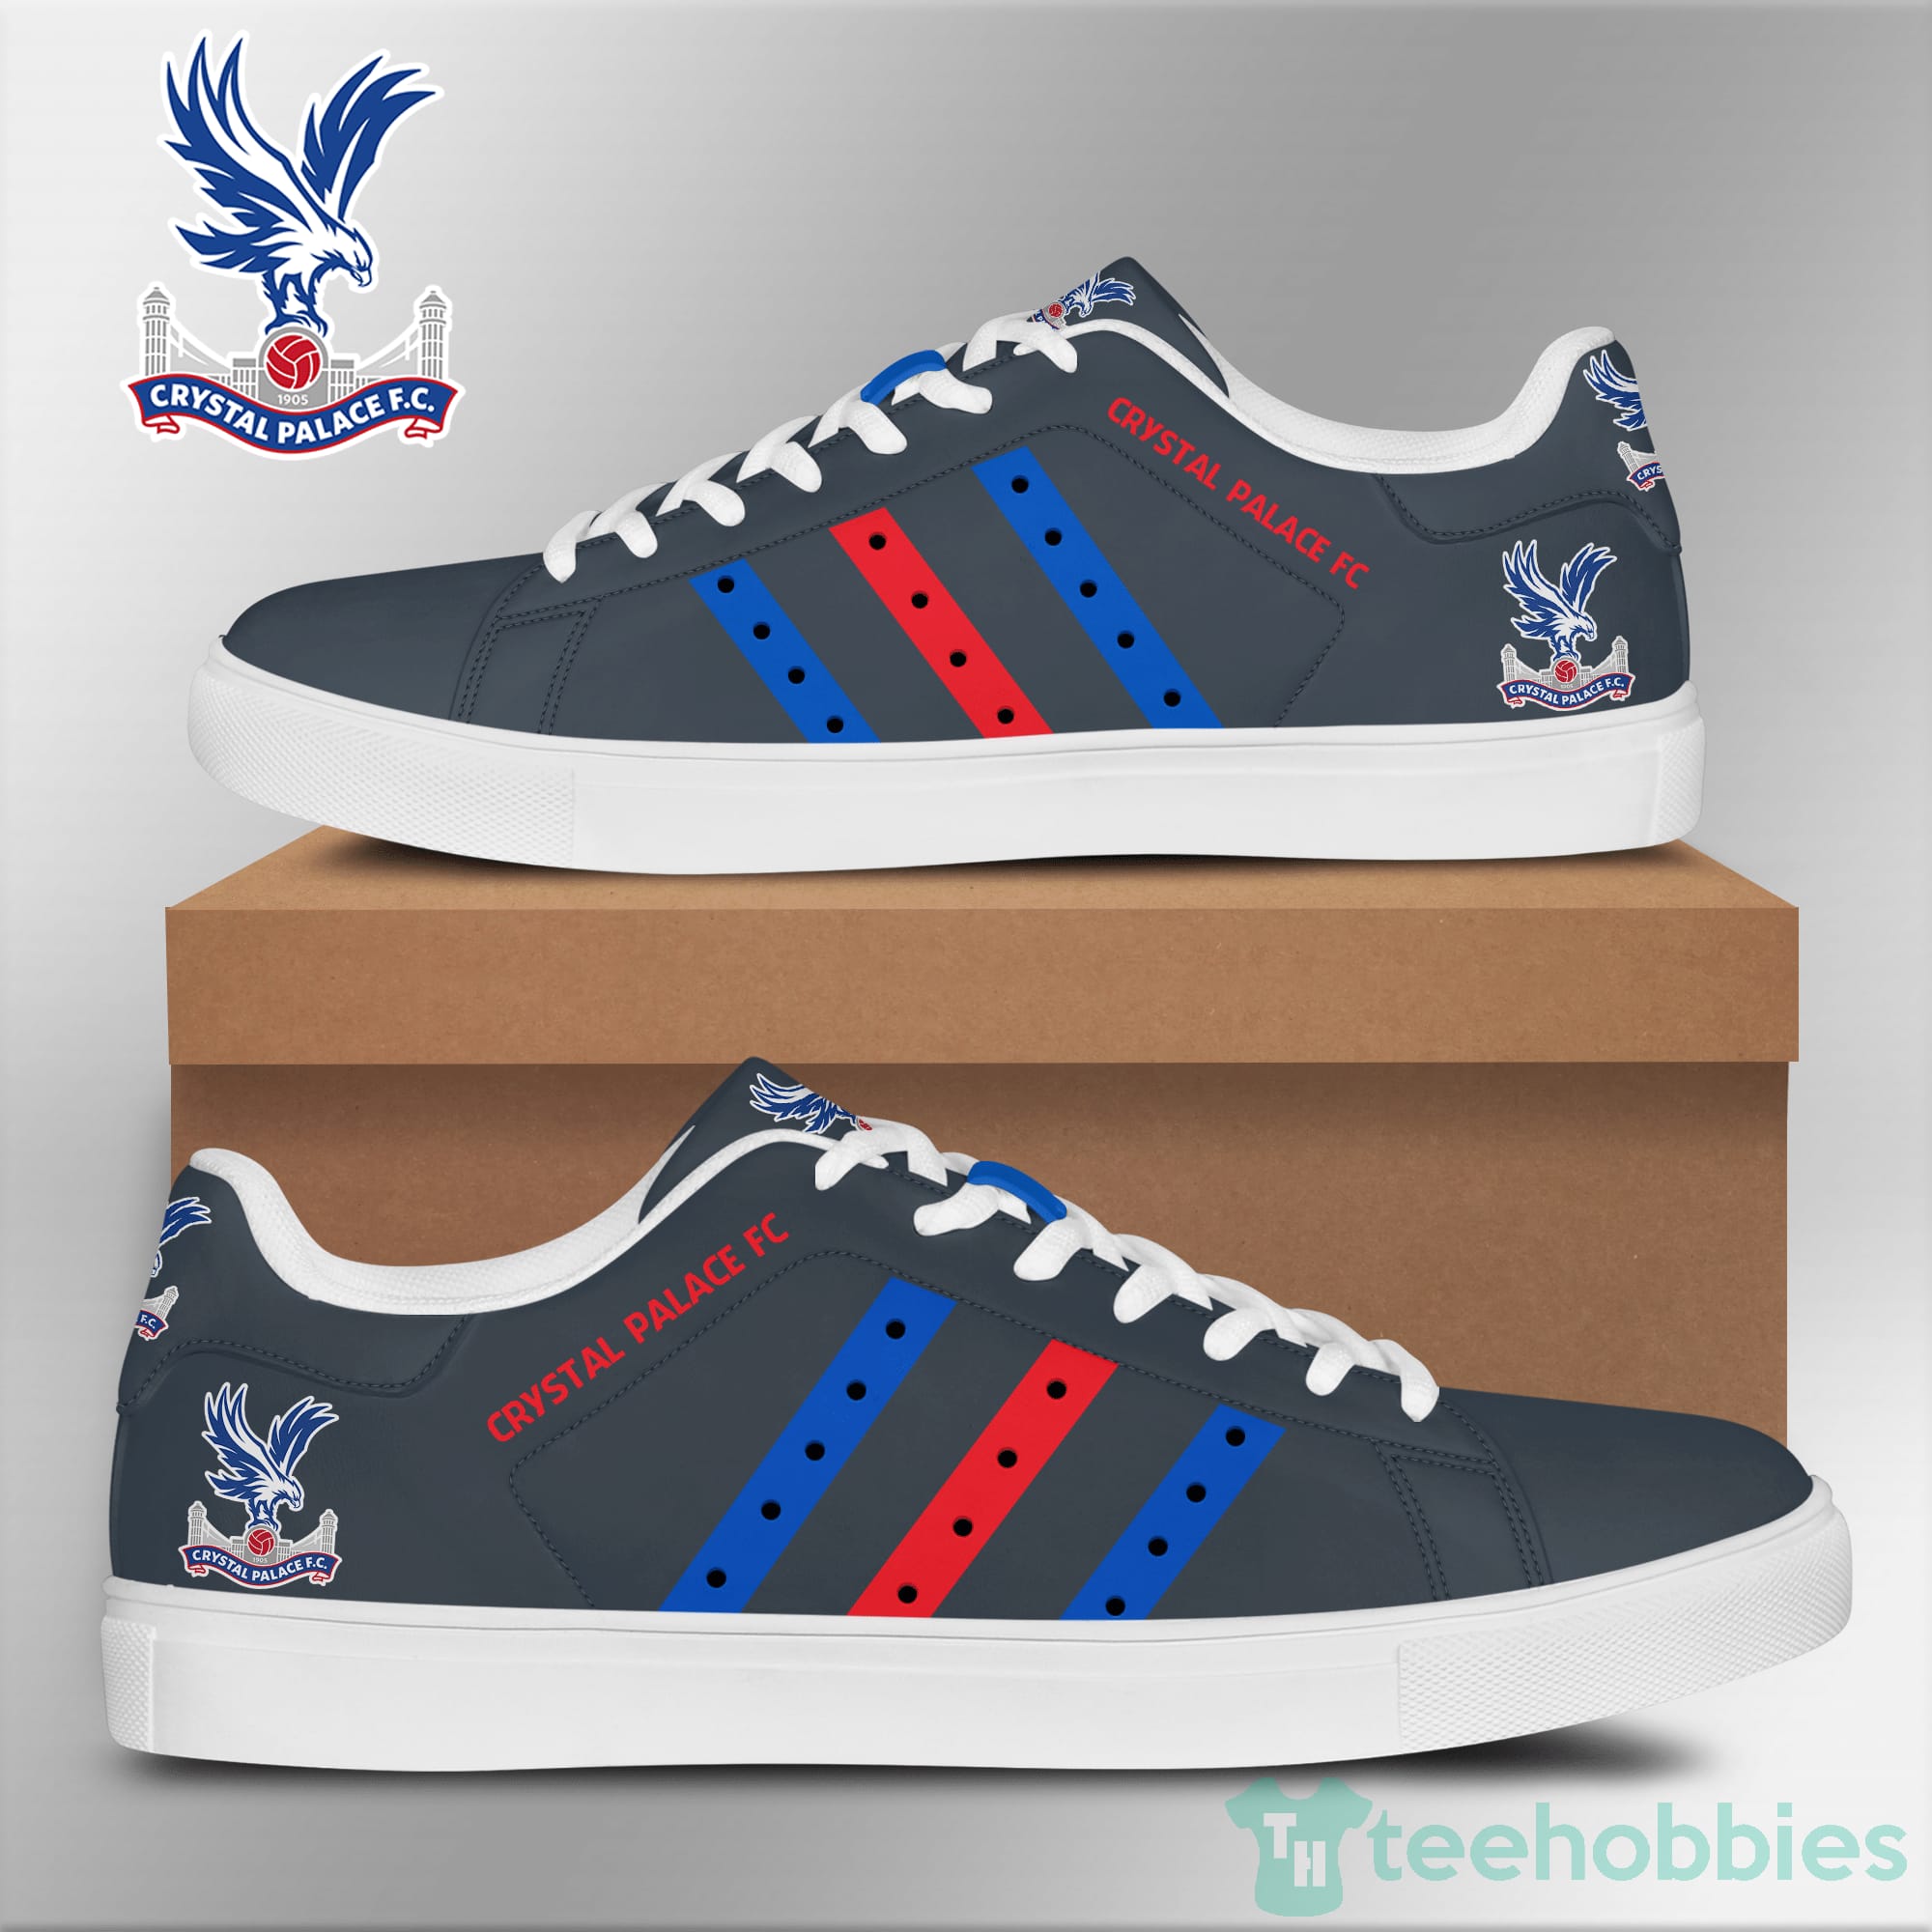 Crystal Palace Fc Grey Low Top Skate Shoes